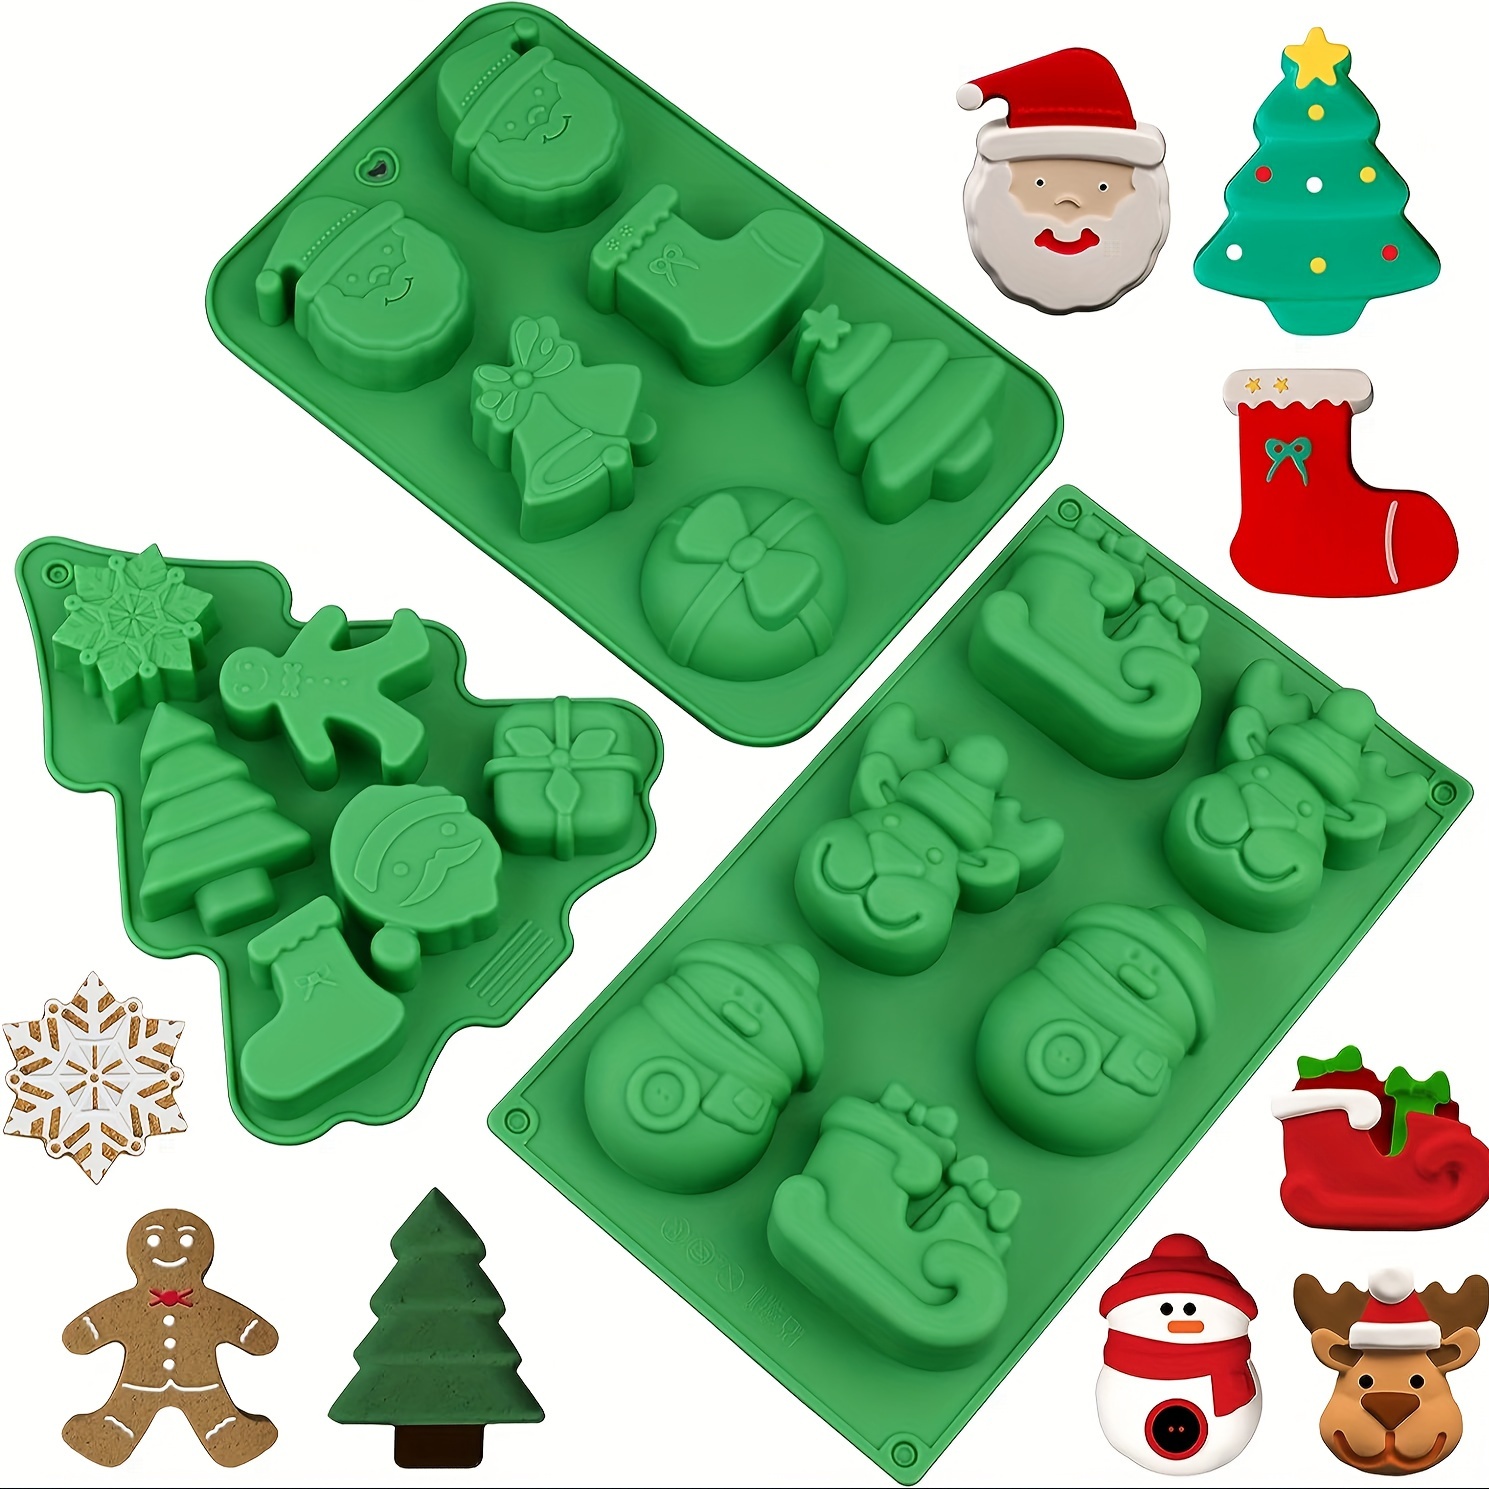 1PC Christmas Silicone Molds Chocolate Molds Candy Molds Baking Molds Large  for Baking Sweet Treat,Cake Xmas Gift Handmade Soap Candles with Shape of  ChristmasTree,Santa Head Party Decor